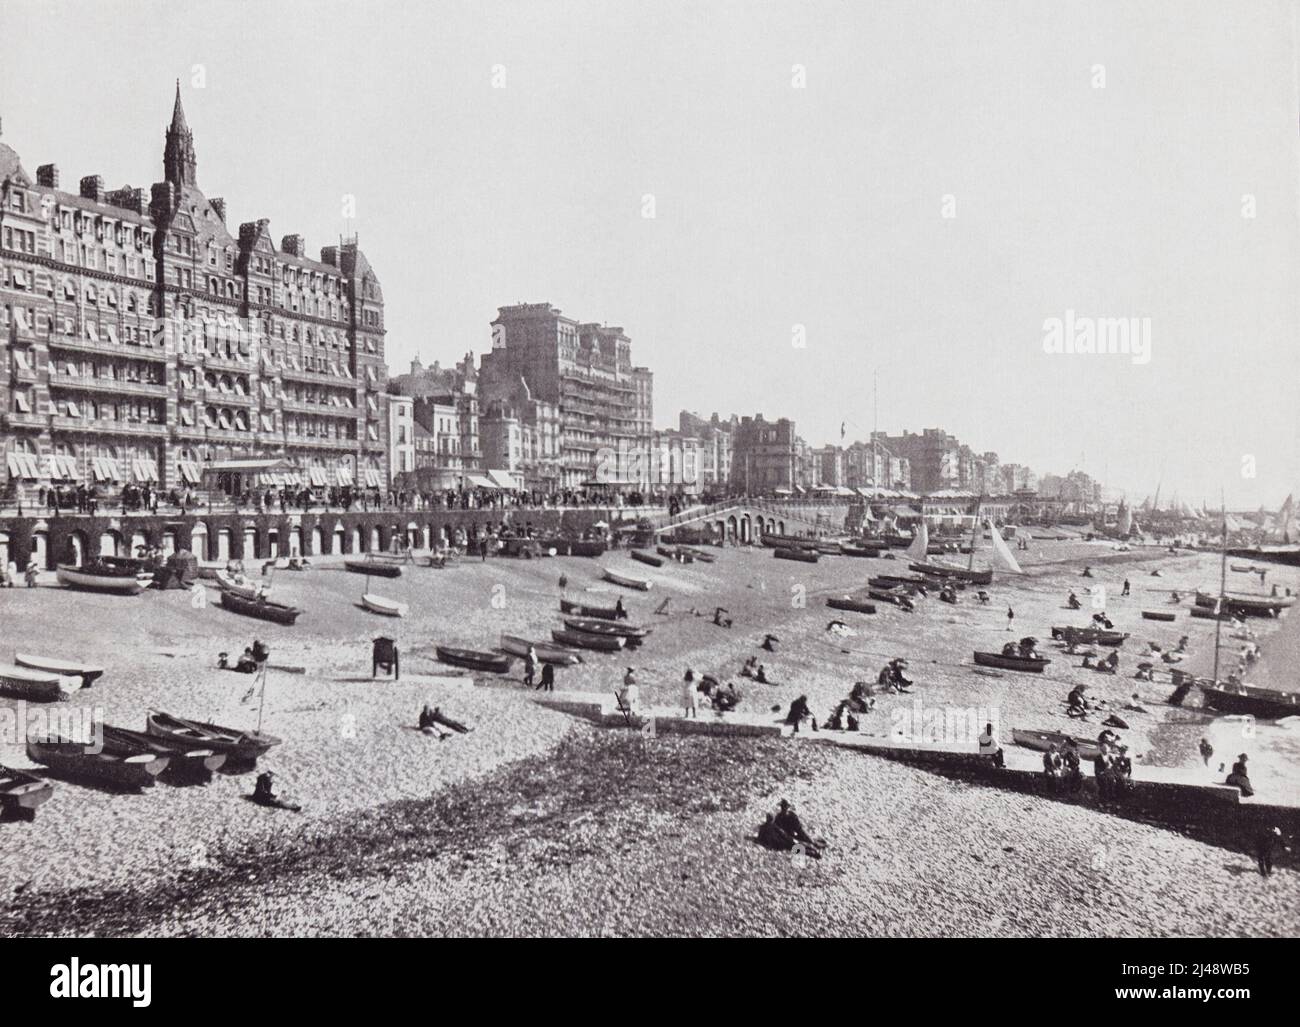 The Hotel Metropole and beach, Brighton, East Sussex, England, seen here in the 19th century.  From Around The Coast,  An Album of Pictures from Photographs of the Chief Seaside Places of Interest in Great Britain and Ireland published London, 1895, by George Newnes Limited. Stock Photo